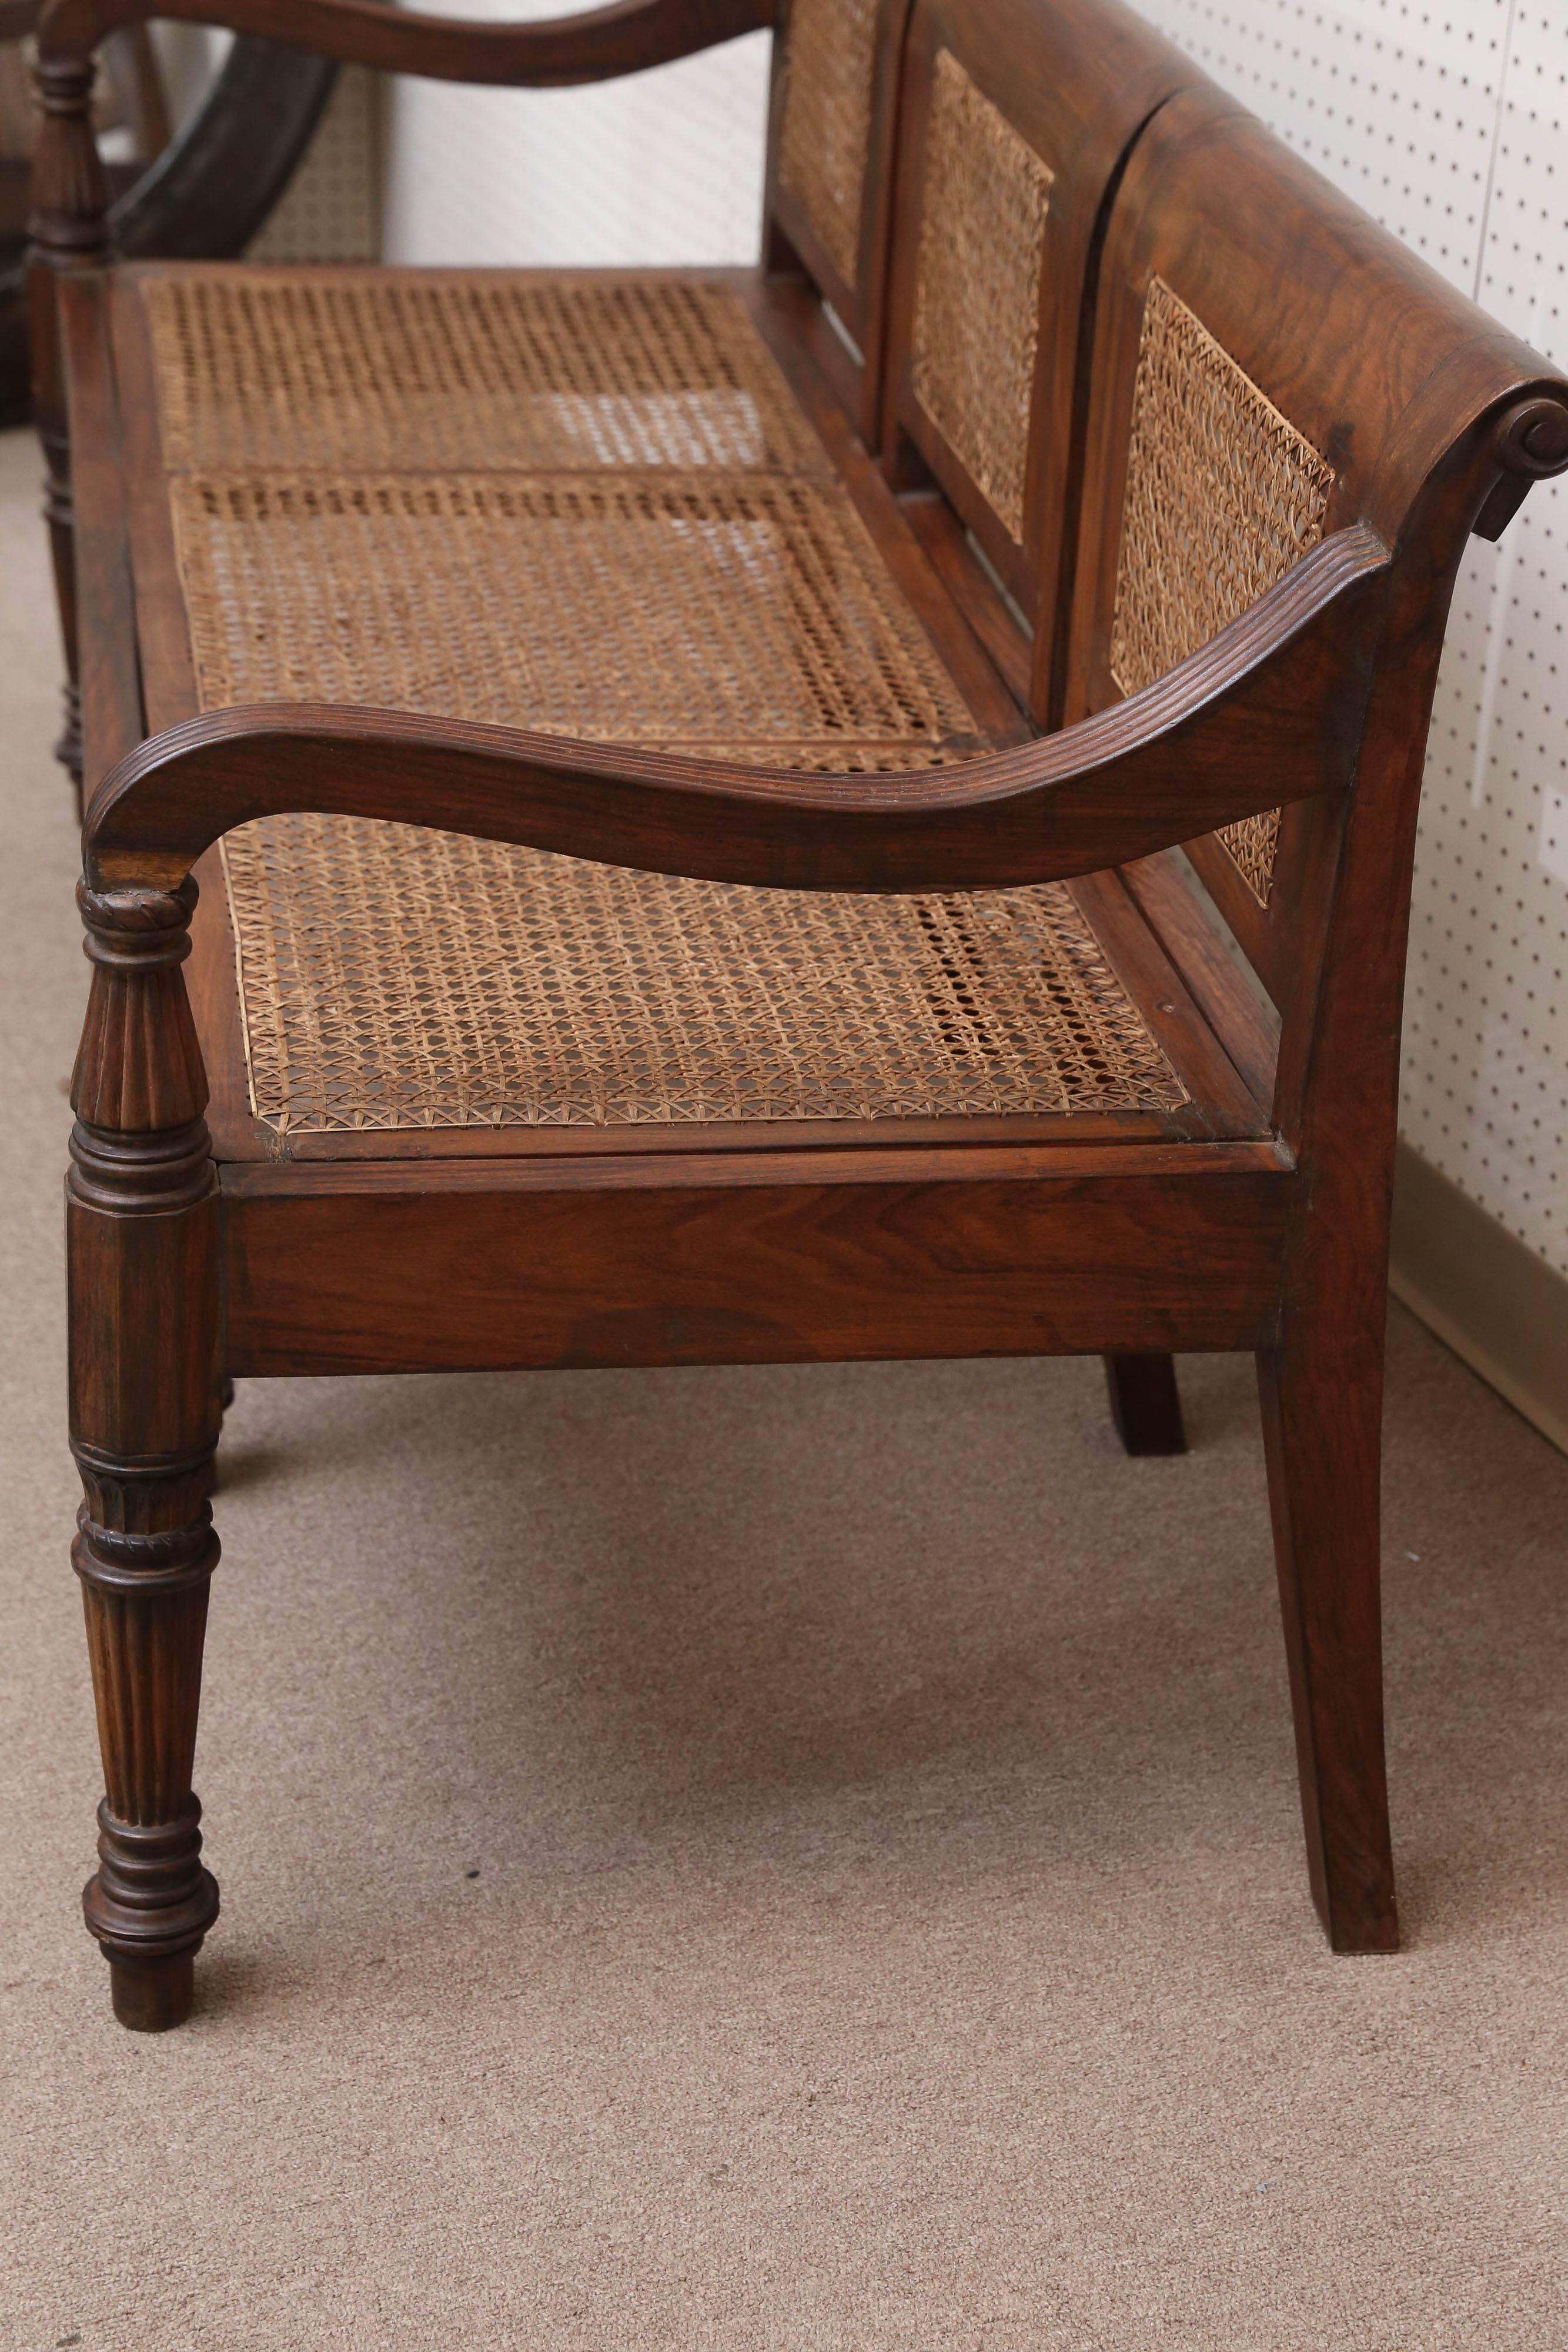 Hand-Crafted 1920s Solid Teakwood and Cane British Colonial Bench from a Tea Plantation